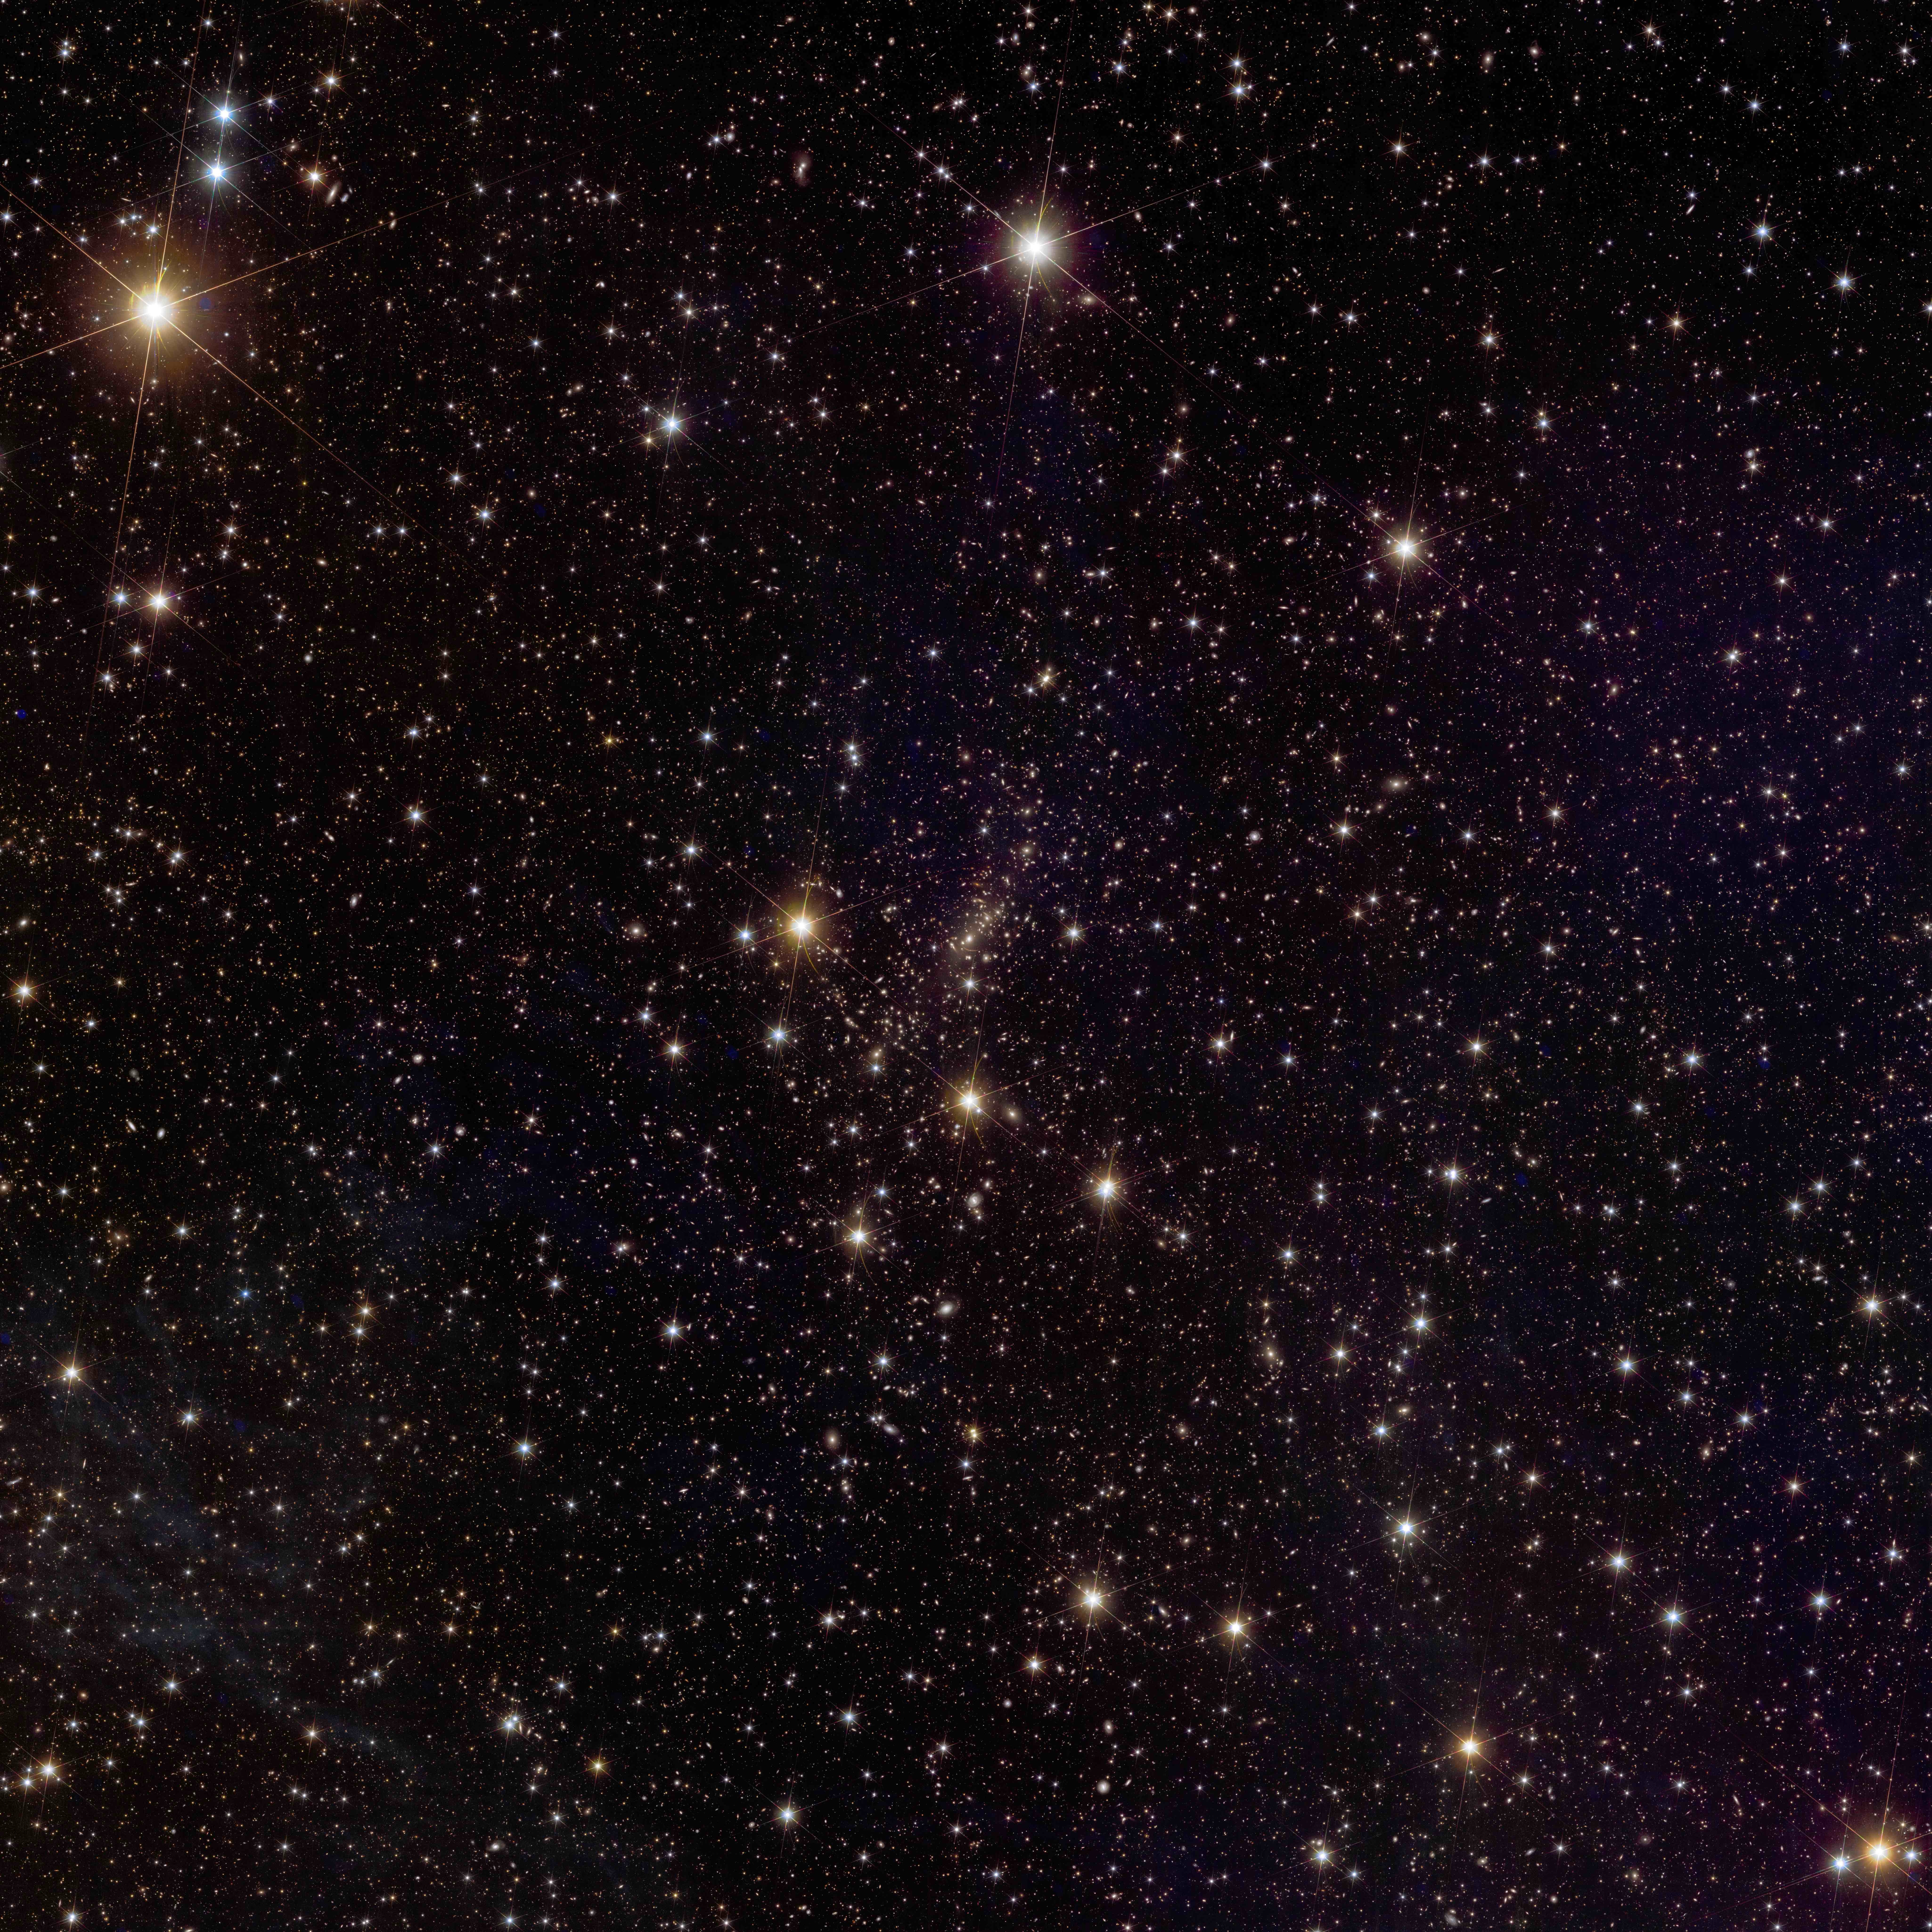 Thousands of stars and galaxies dot the image against a pitch-black background. Some bright stars show six diffraction spikes coming from a central light-halo. Other stars and galaxies are just tiny bright dots, like specks of paint distributed over the image. The brightest star sits in the upper left corner. In the centre of the image, the tiny bright dots are more abundant.